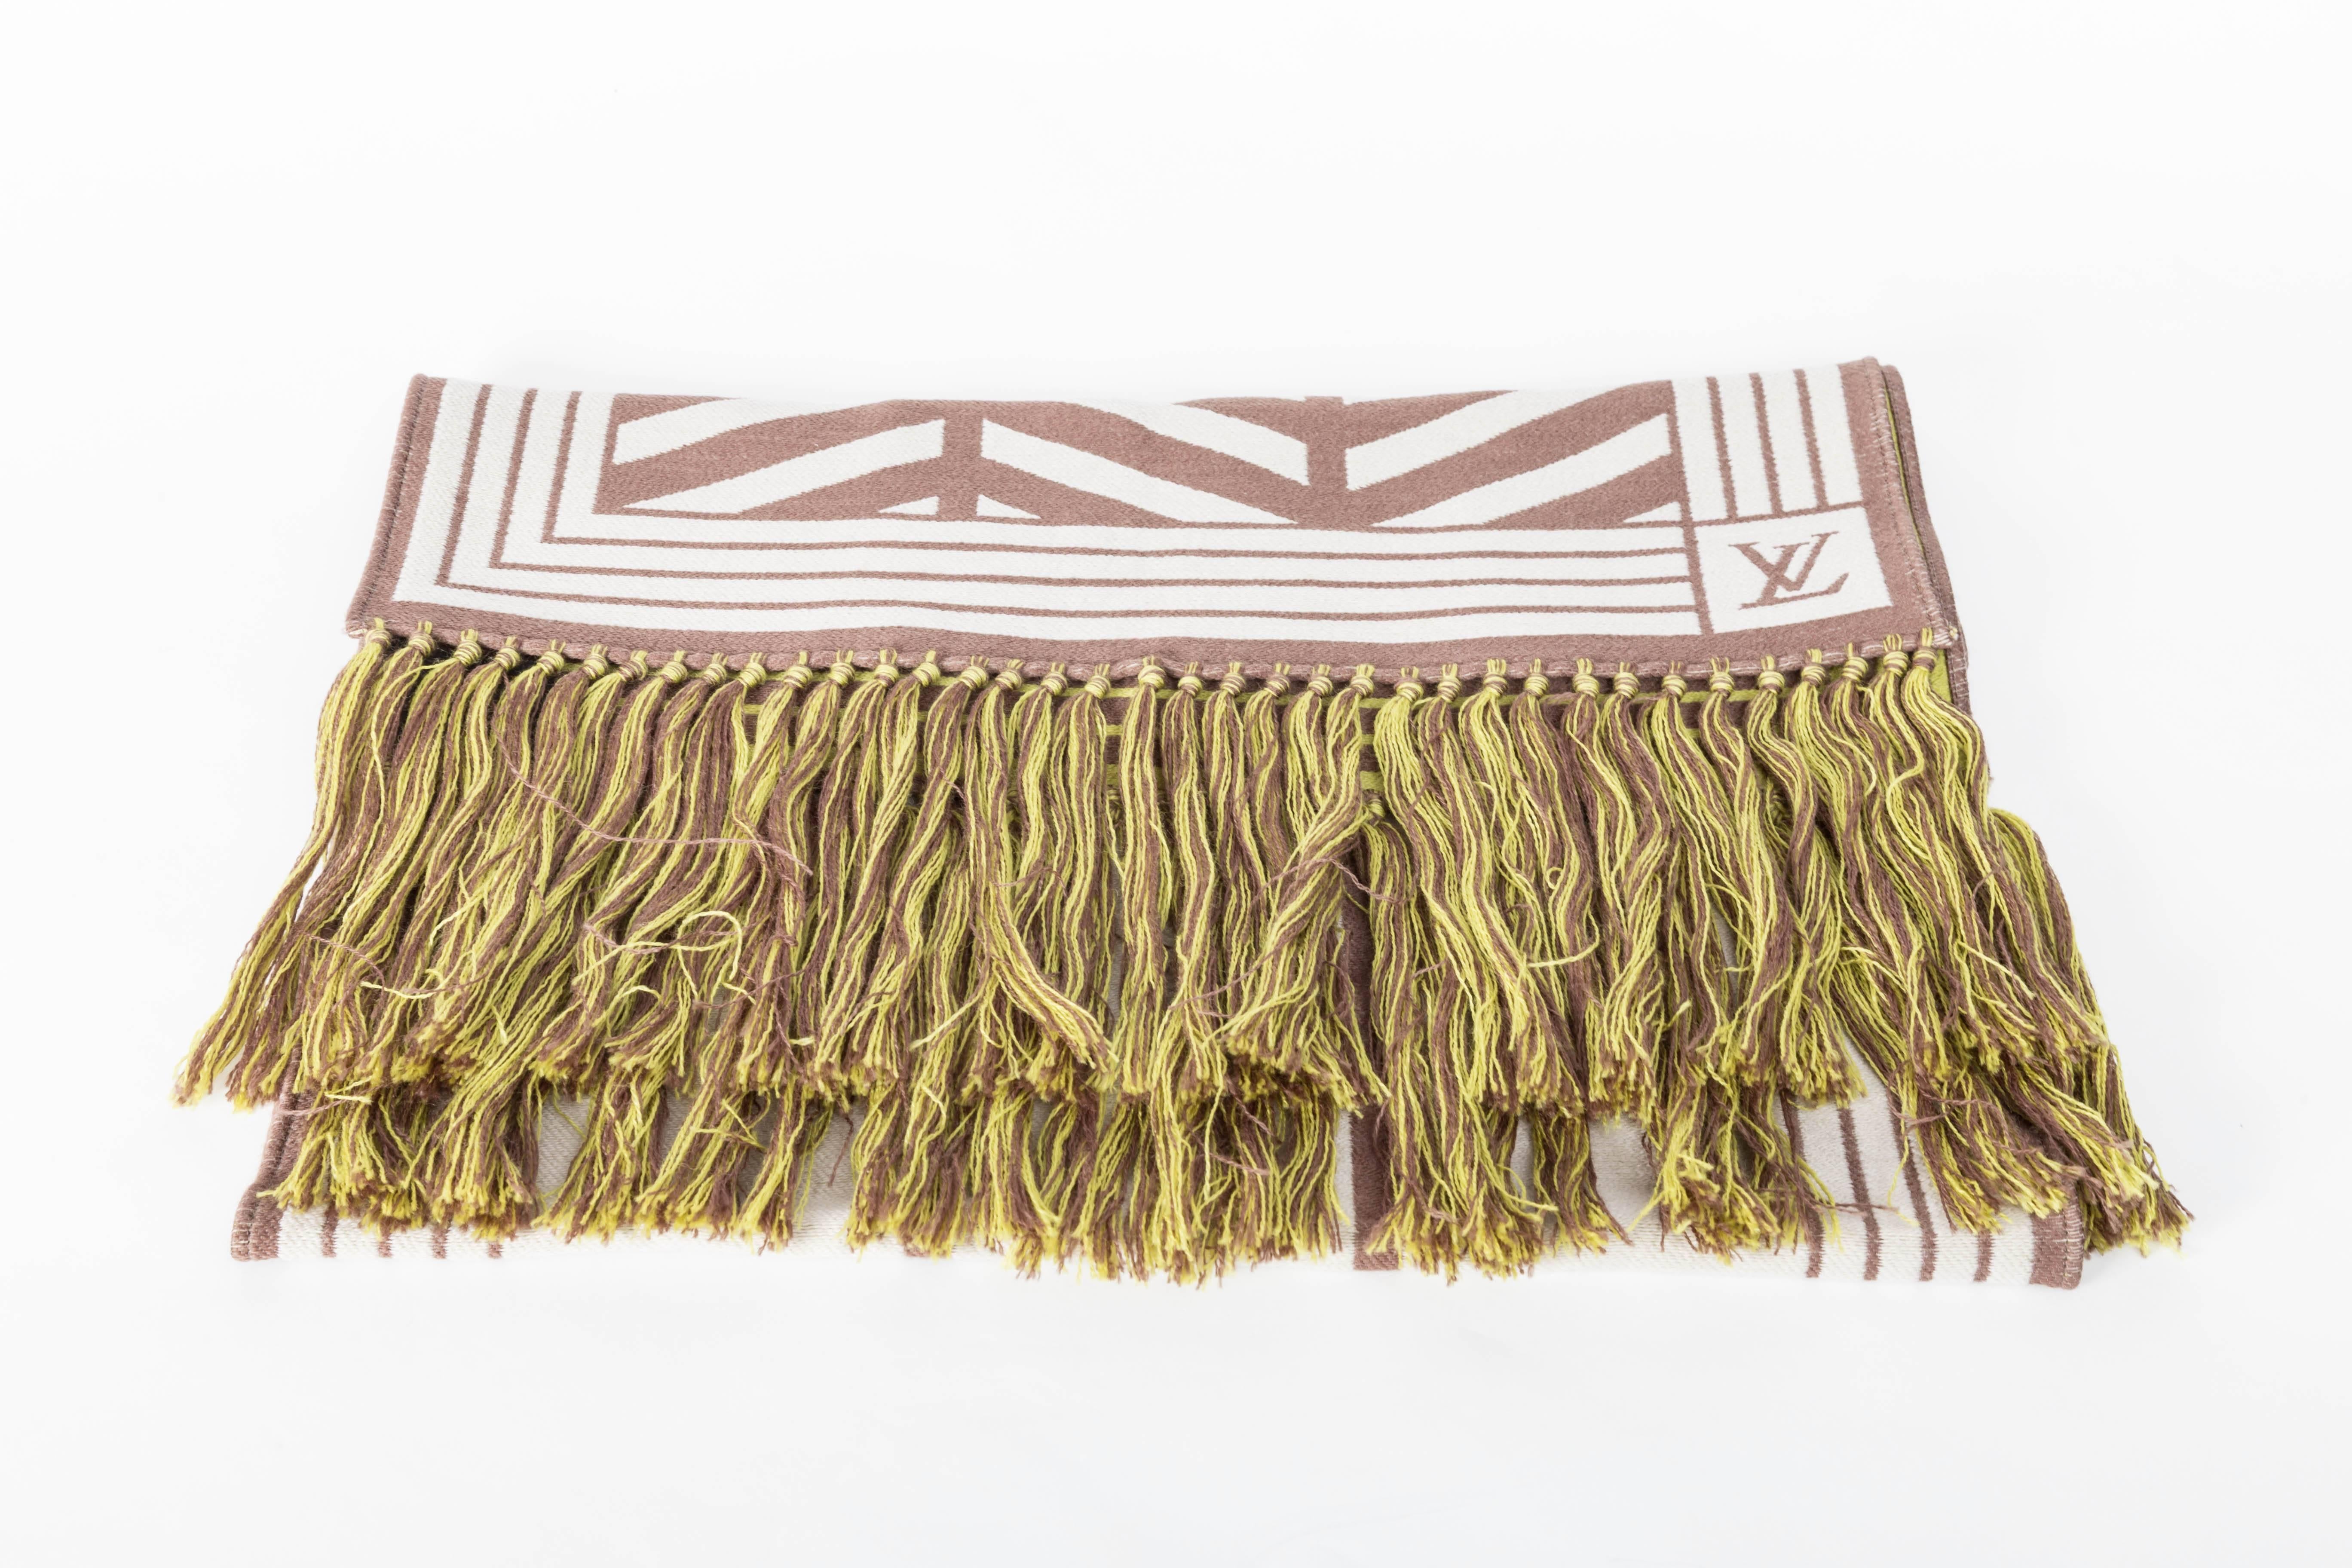 Great Vintage Louis Vuitton Paris  Scarf in Apple Green and Taupe Wool / Silk with 6 Inch Tassels
LV Logo 
Condition is Excellent
